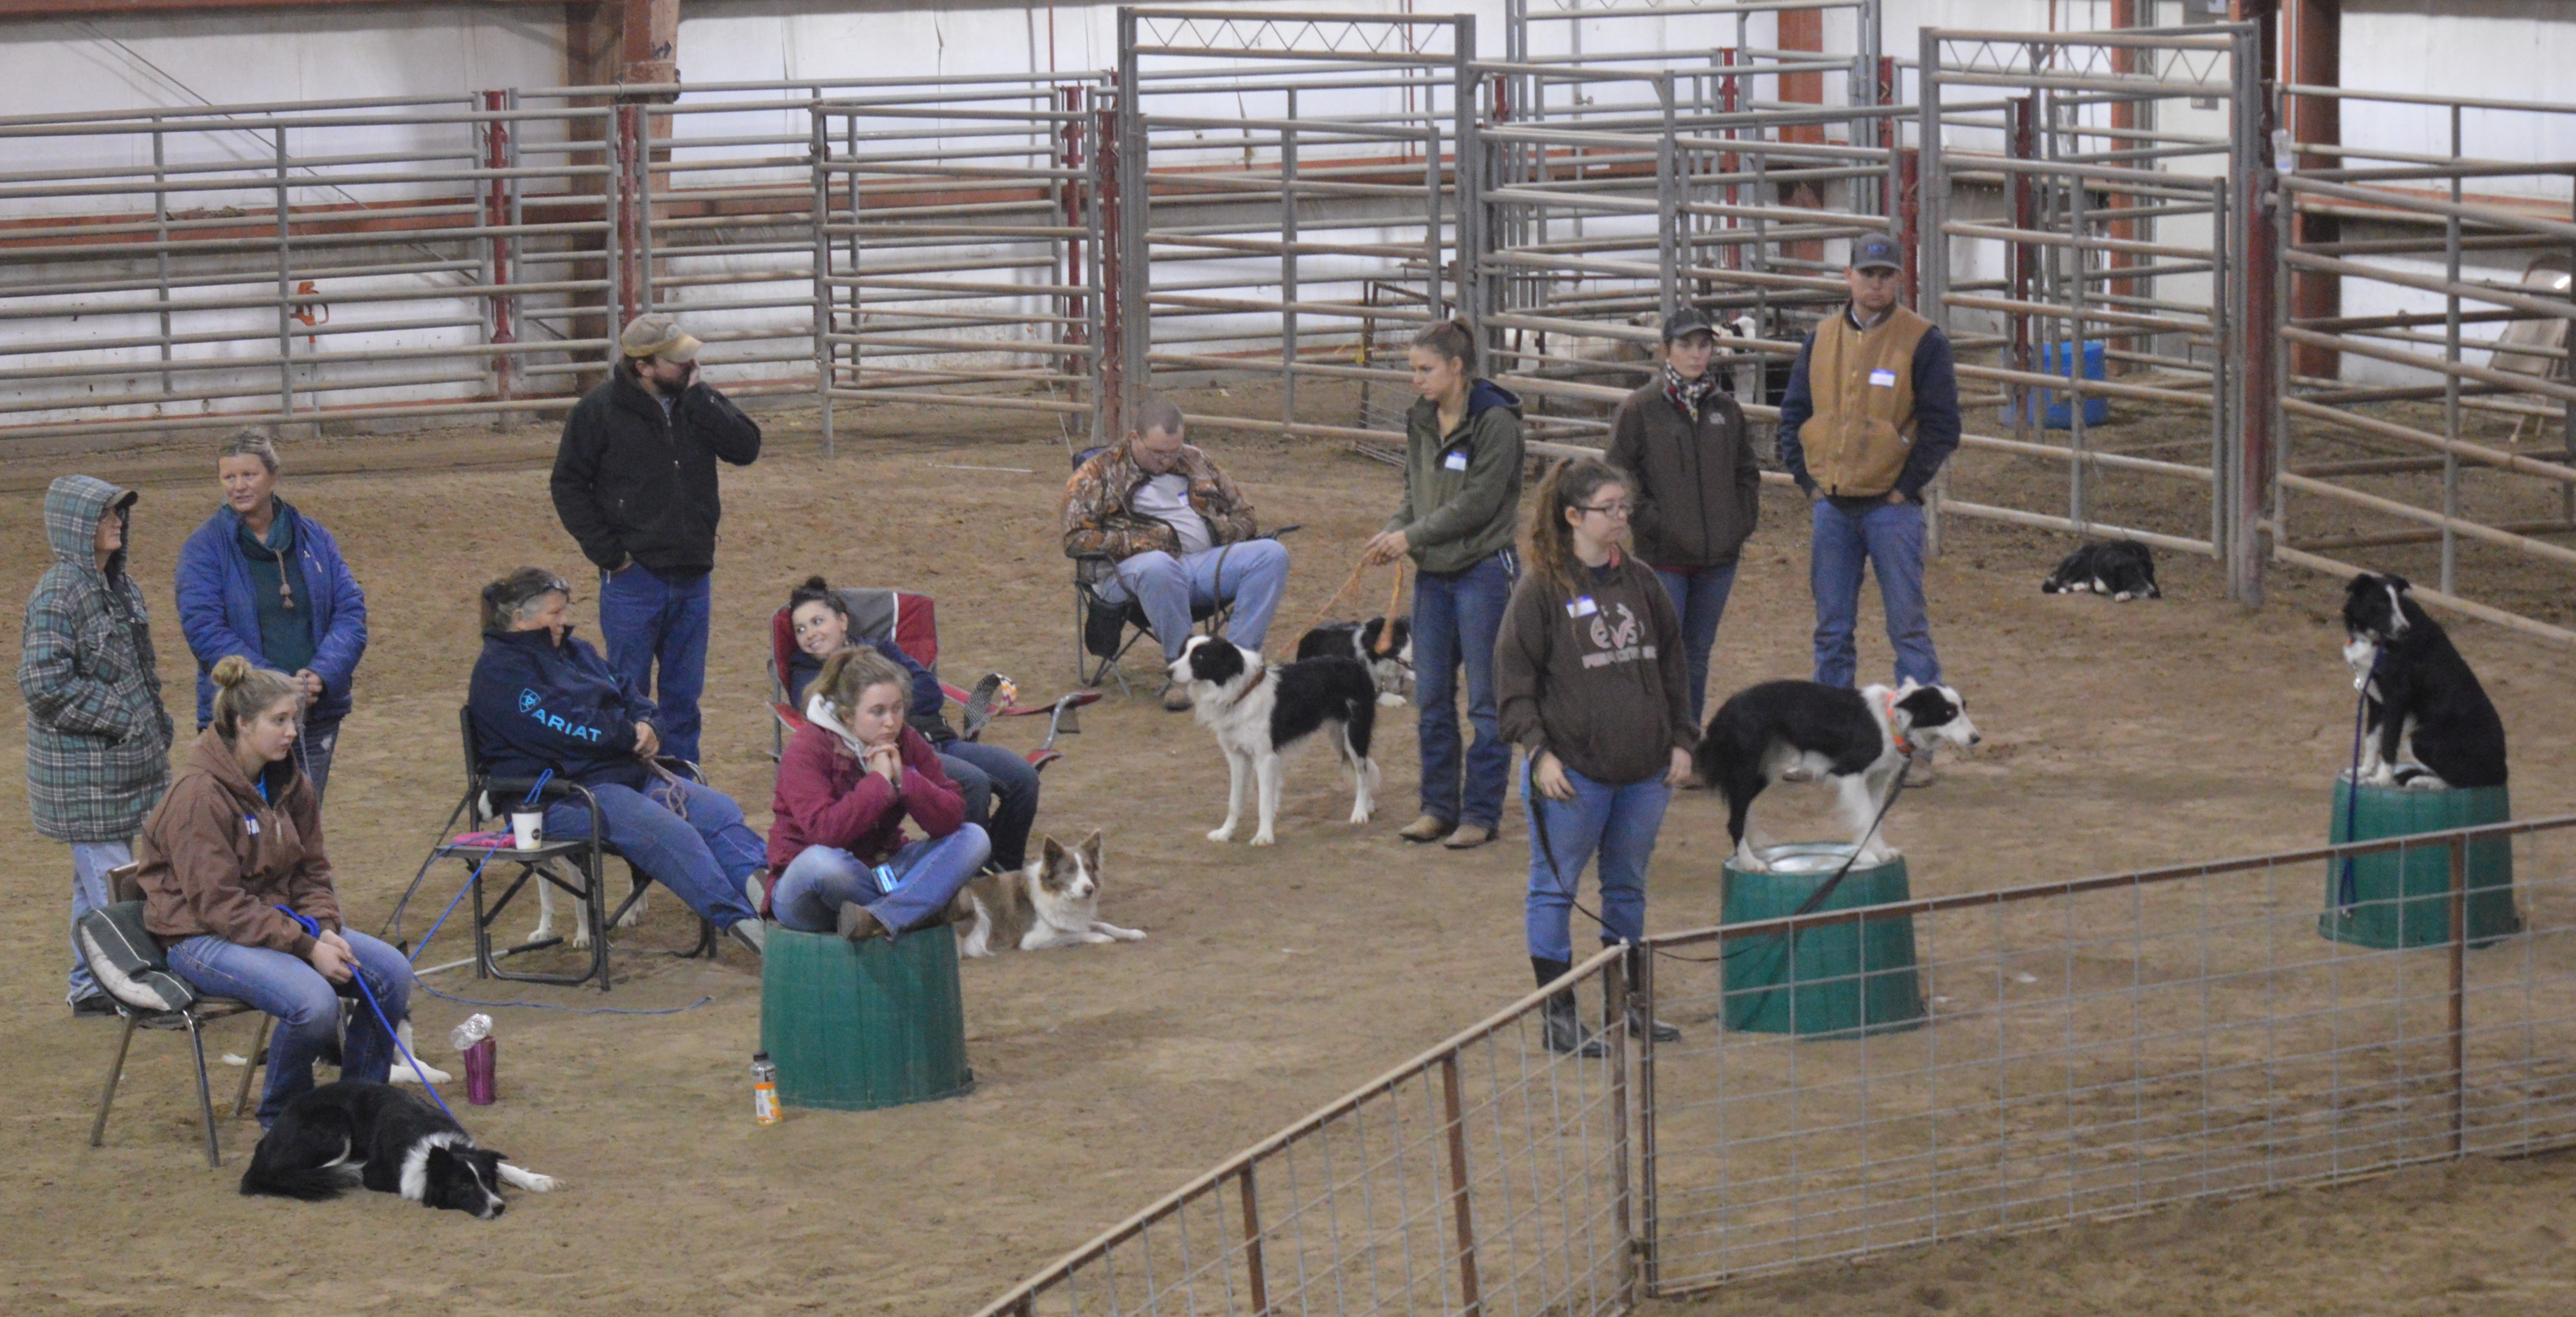  Participants and their stock dogs watch a Cow Dog Clinic in 2017 at the NCTA campus. (NCTA photo)